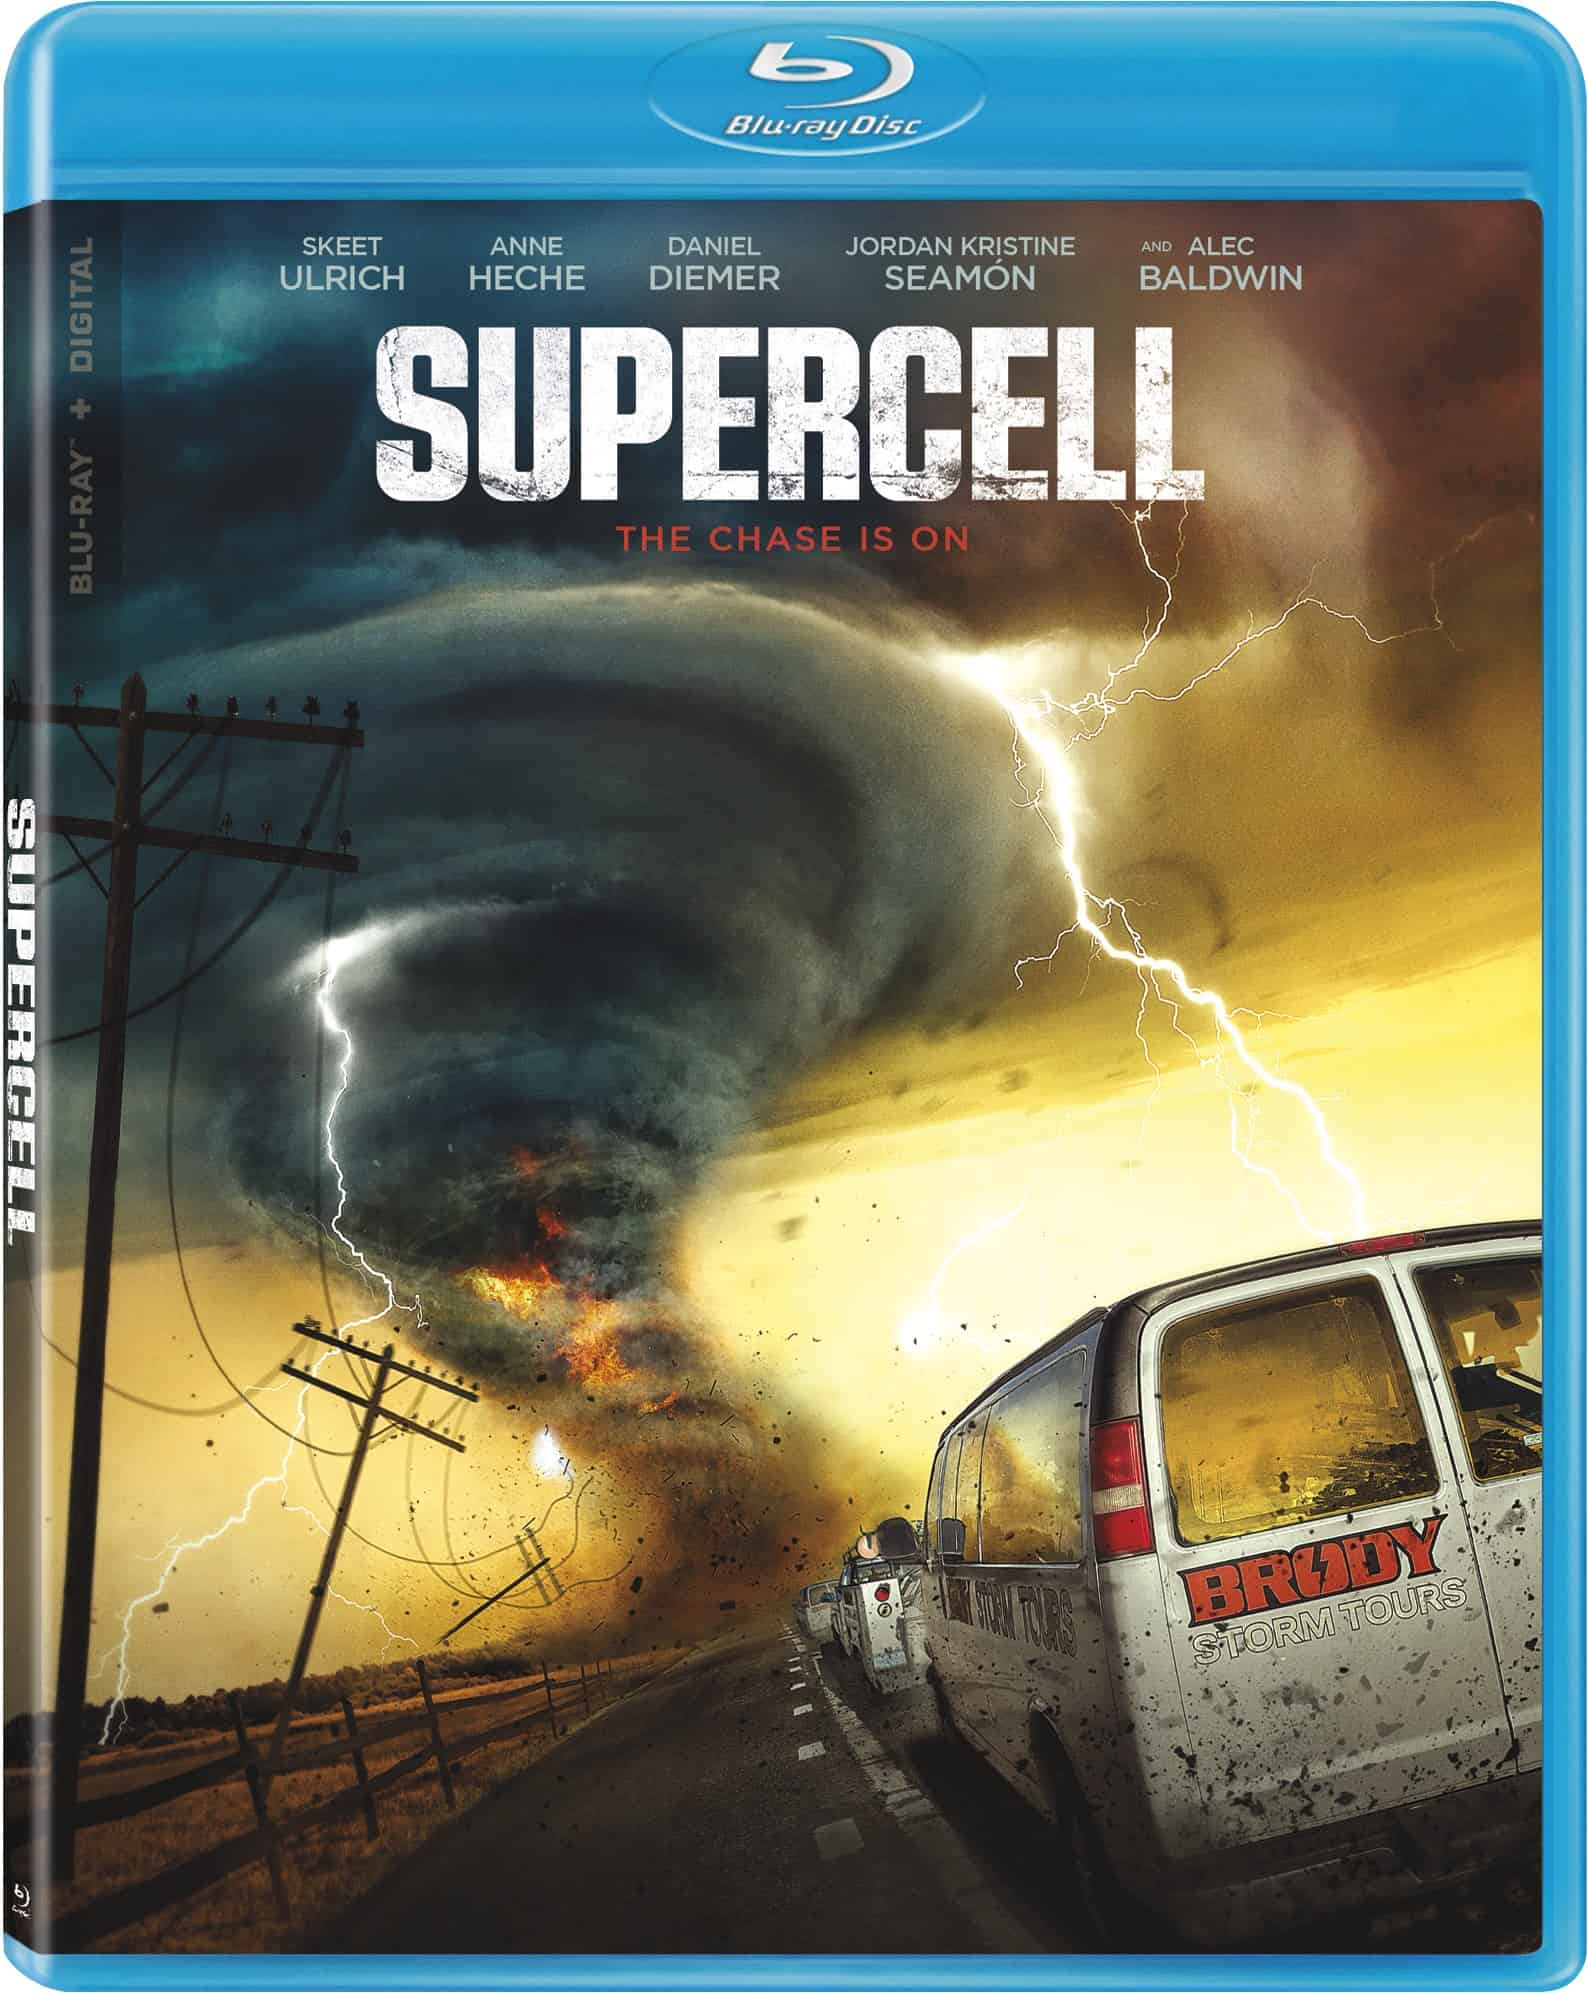 Supercell comes to Blu-ray on May 2nd 24